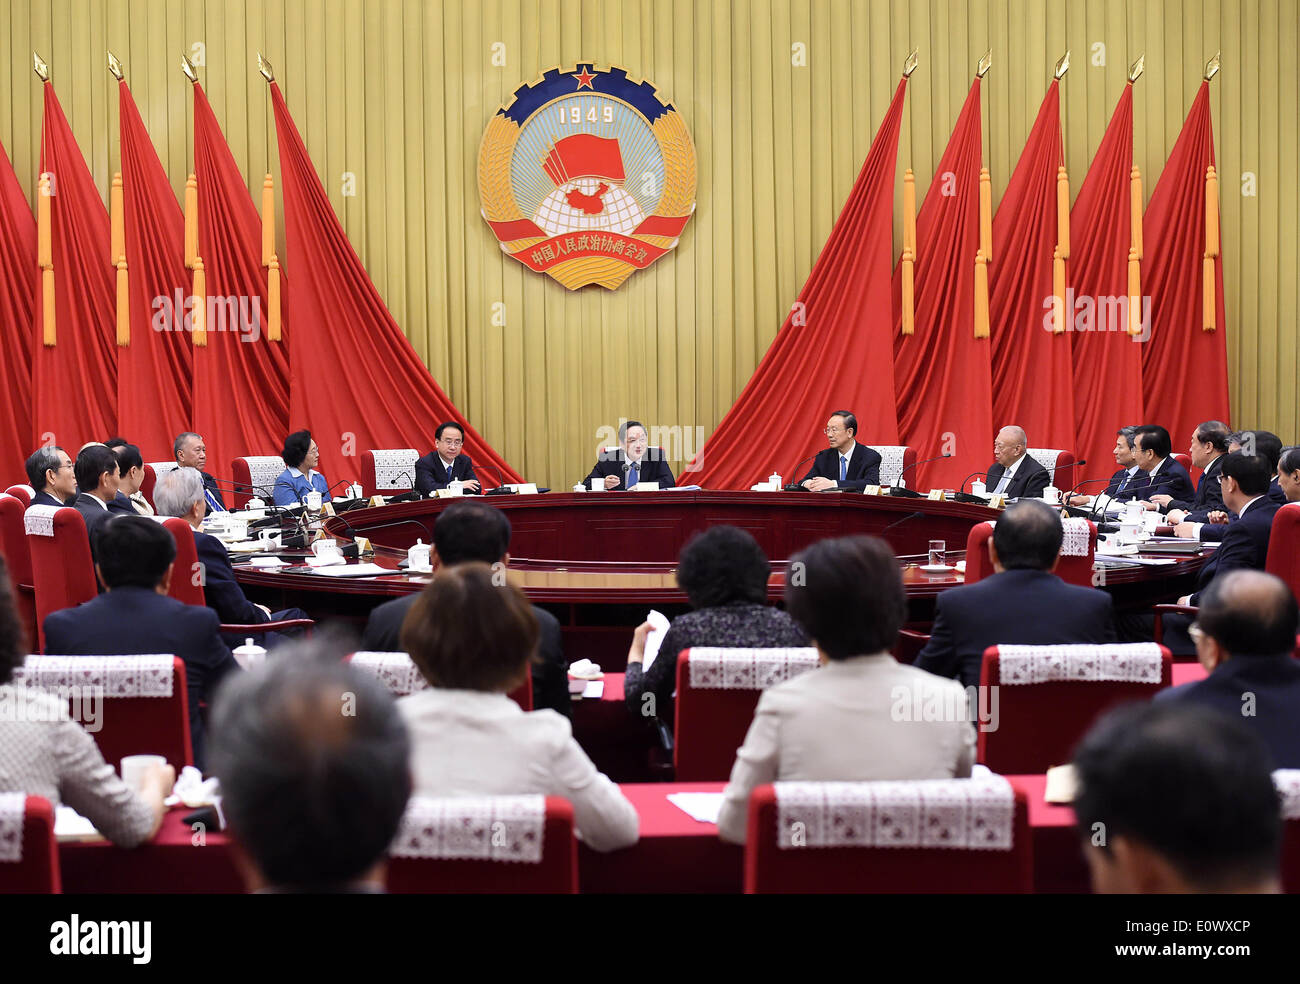 (140520) -- BEIJING, May 20, 2014 (Xinhua) -- Yu Zhengsheng (C, rear), chairman of the National Committee of the Chinese People's Political Consultative Conference (CPPCC), presides over the 15th meeting of the chairman and vice-chairpersons of the 12th CPPCC National Committee in Beijing, capital of China, May 20, 2014. (Xinhua/Liu Jiansheng) (zc) Stock Photo